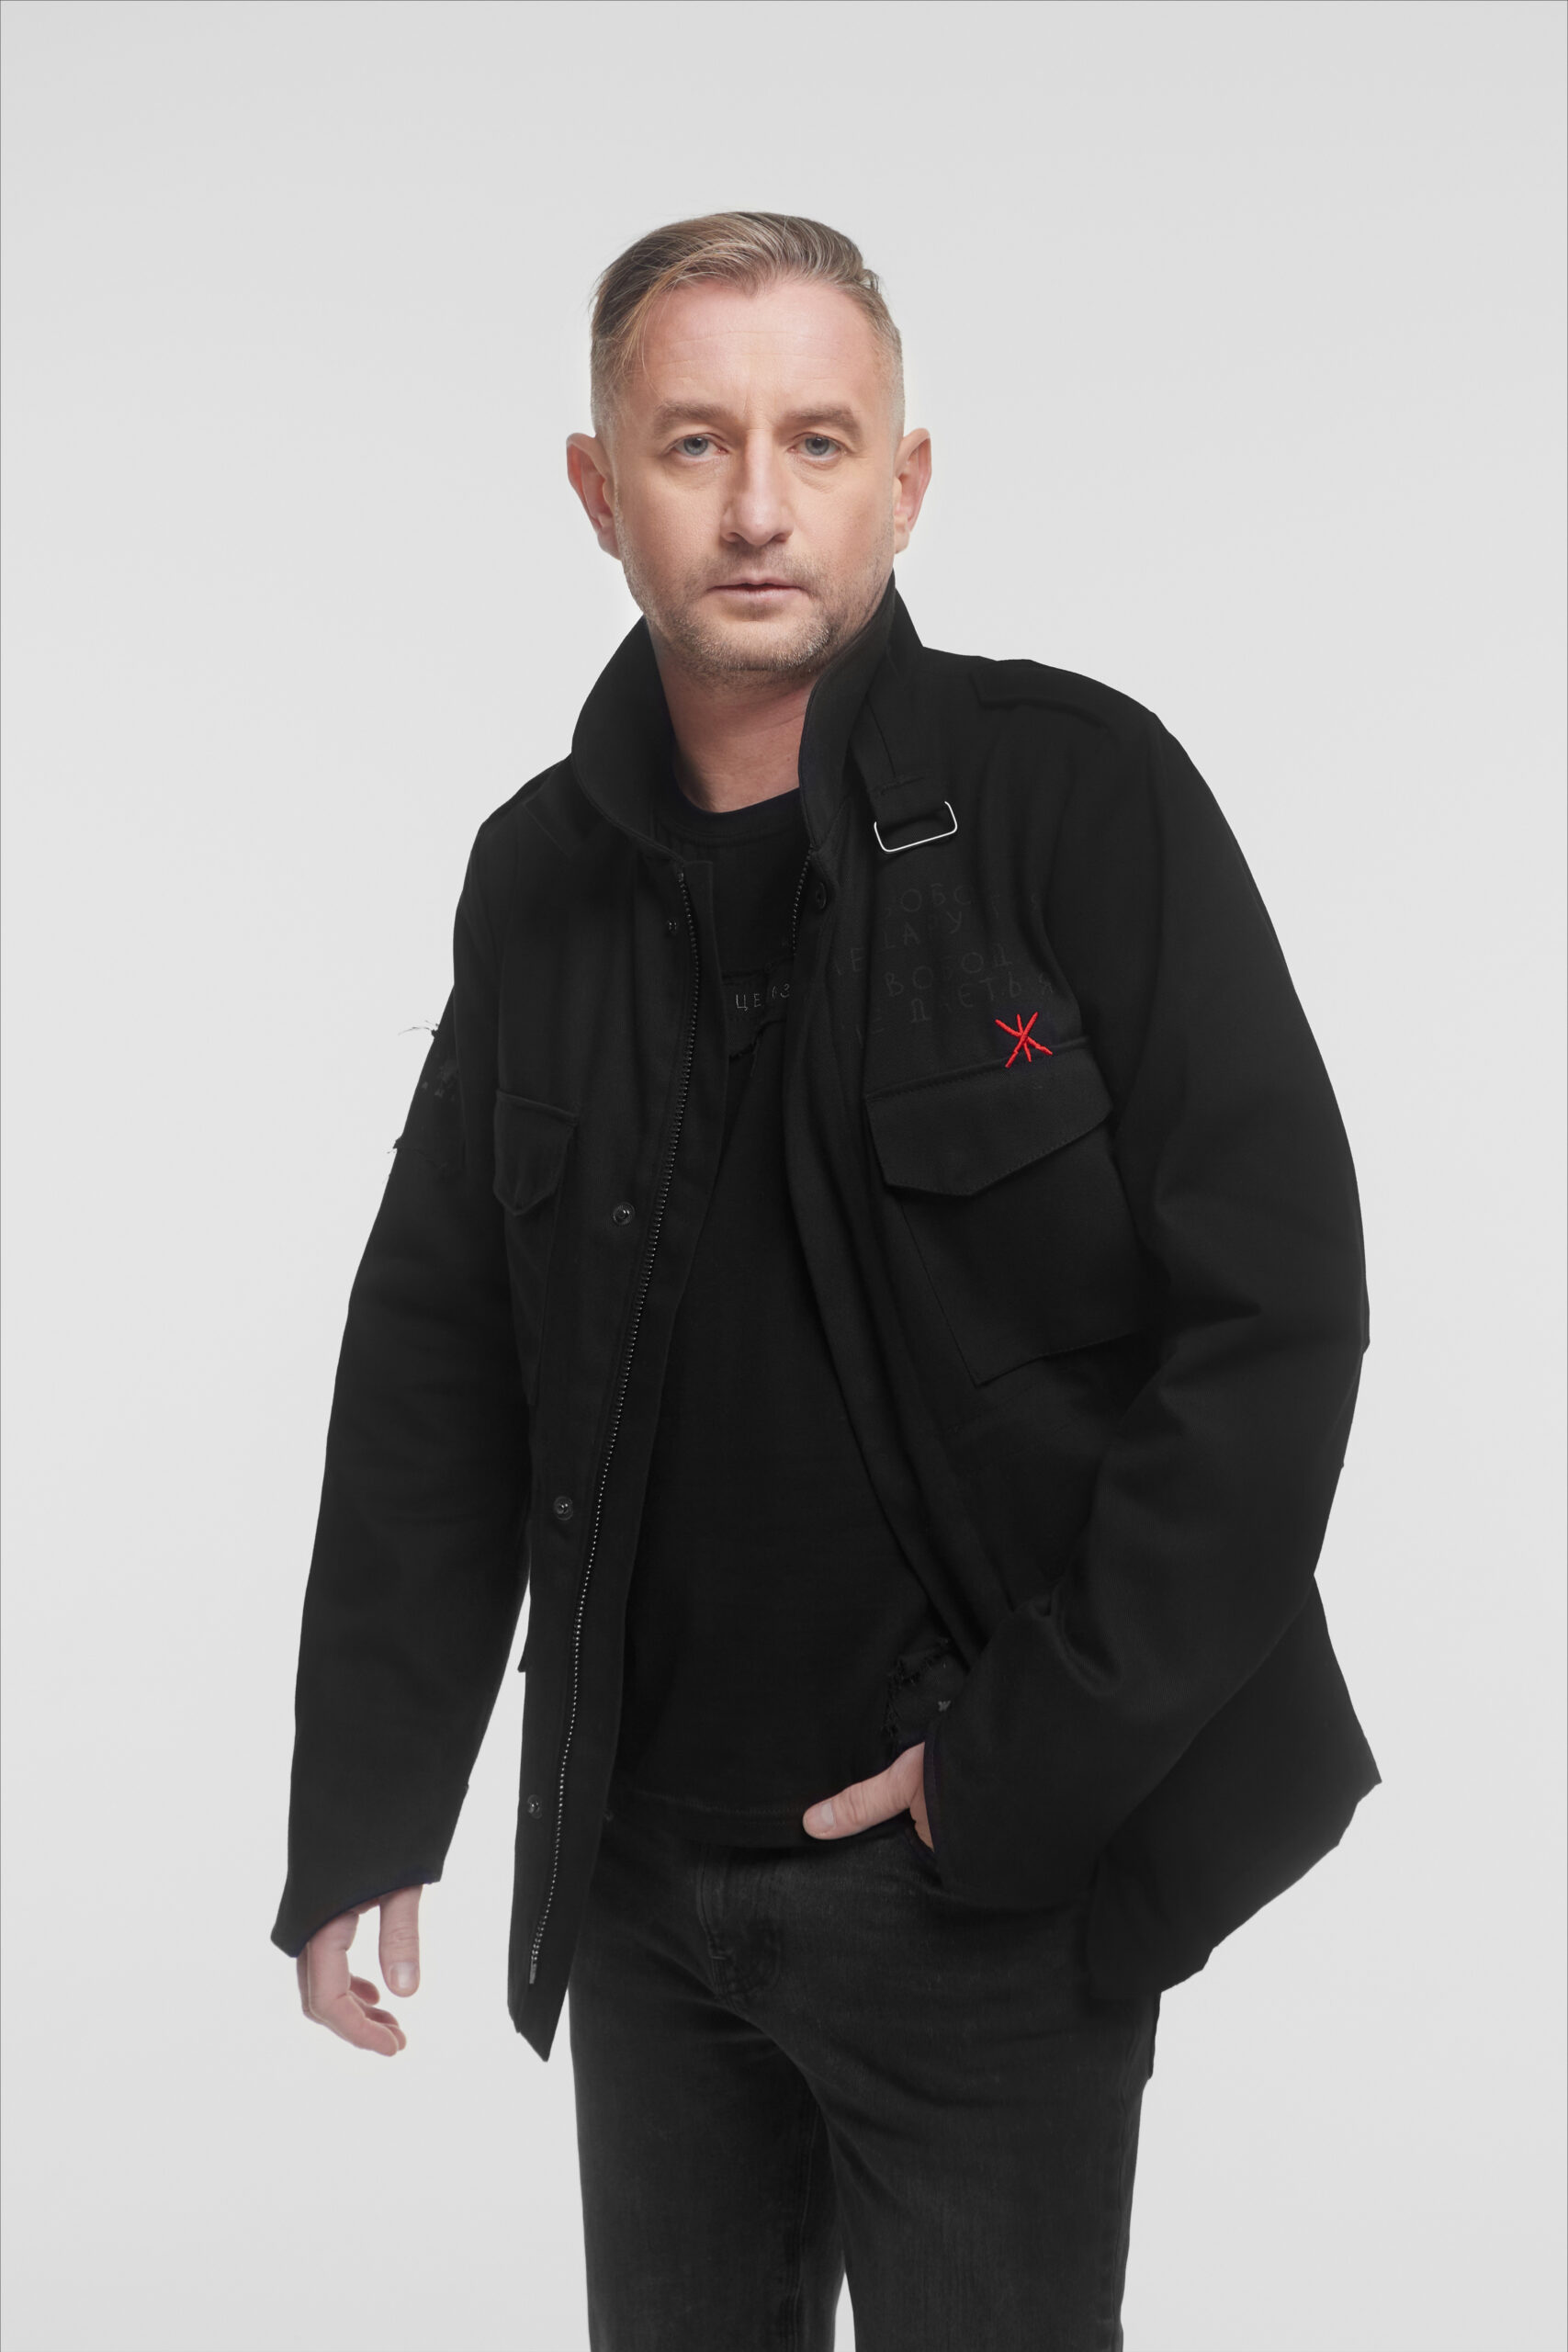 Men's Jacket Freedom. Color black. 
Size worn by the model: М.